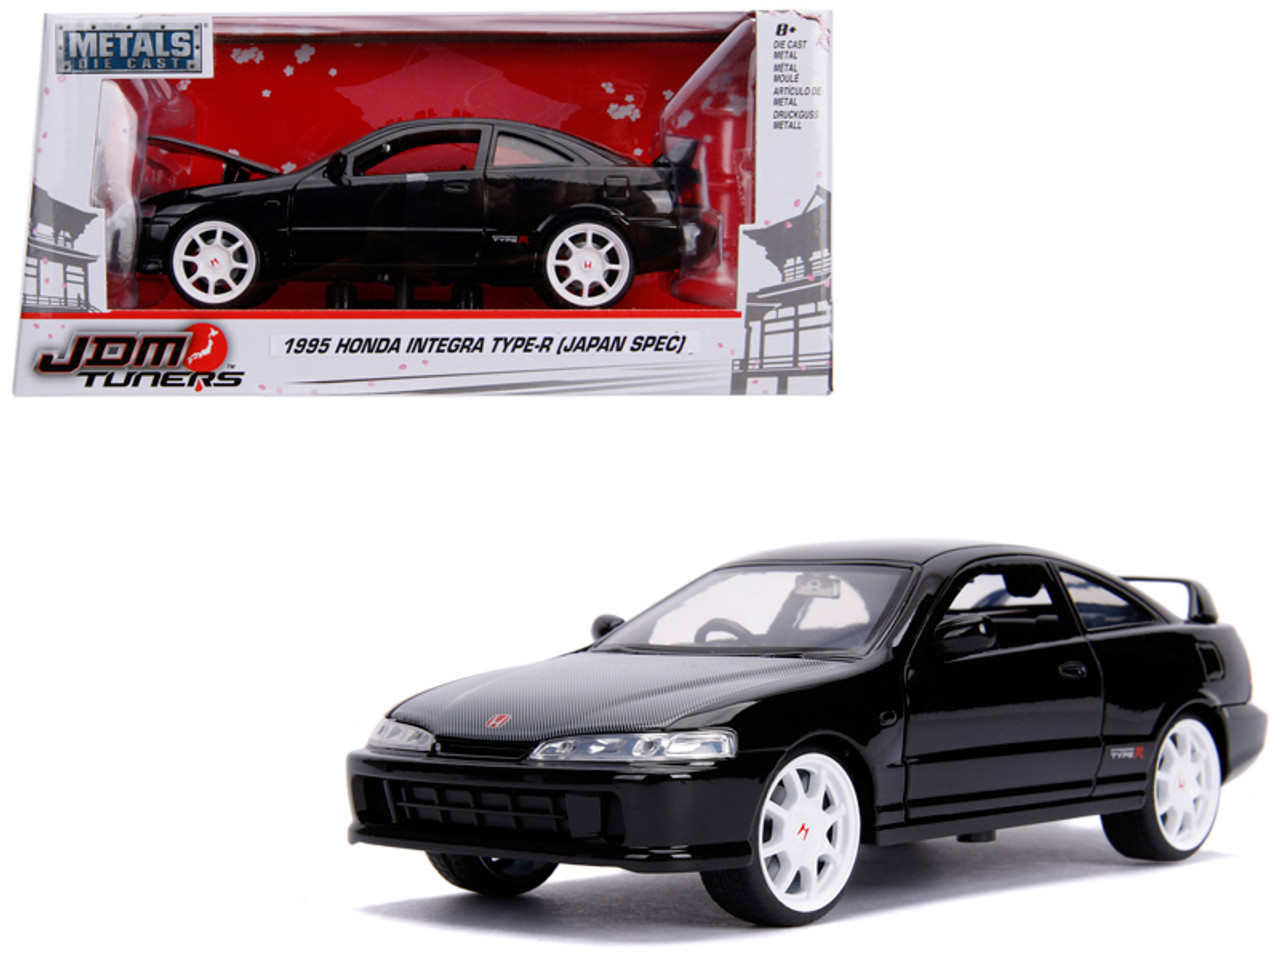 1995 Honda Integra Type-R "Japan Spec" RHD (Right Hand Drive) Glossy Black with Carbon Hood and White Wheels "JDM Tuners" 1/24 Diecast Model Car by Jada